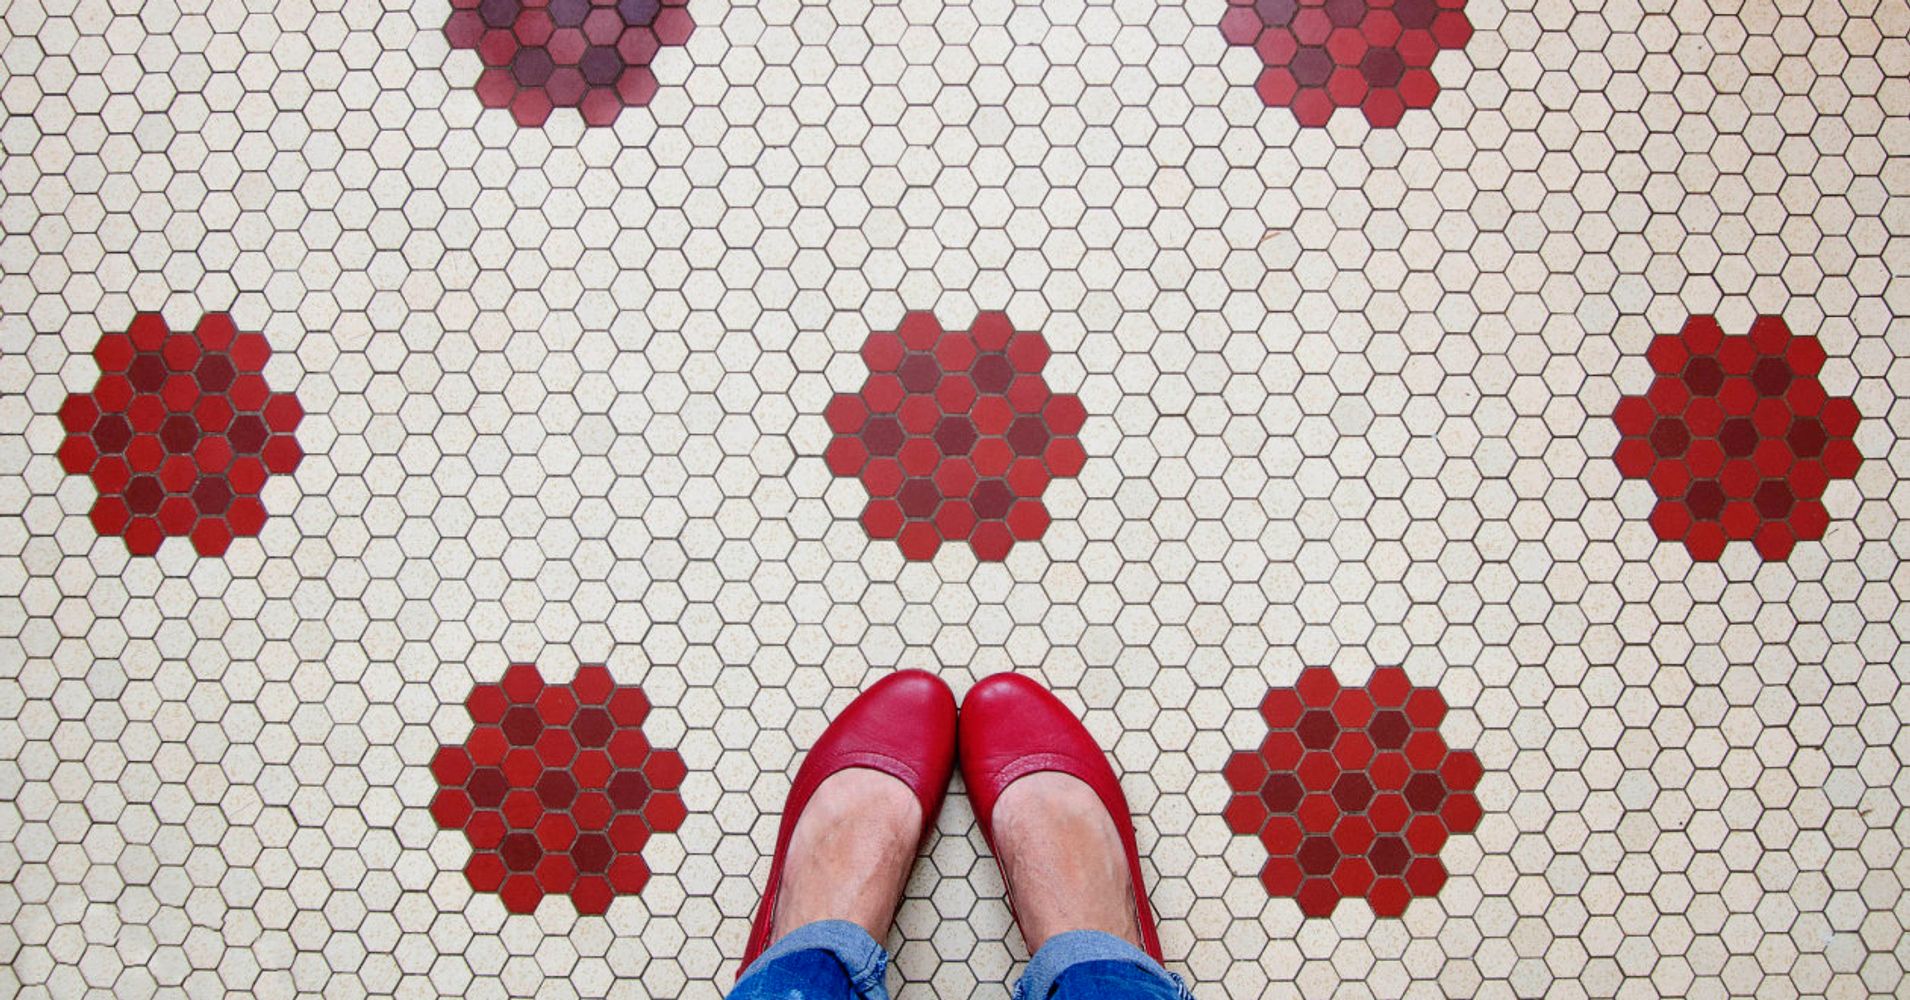 15 Beautiful Floors That Will Make You Stop In Your Tracks | HuffPost